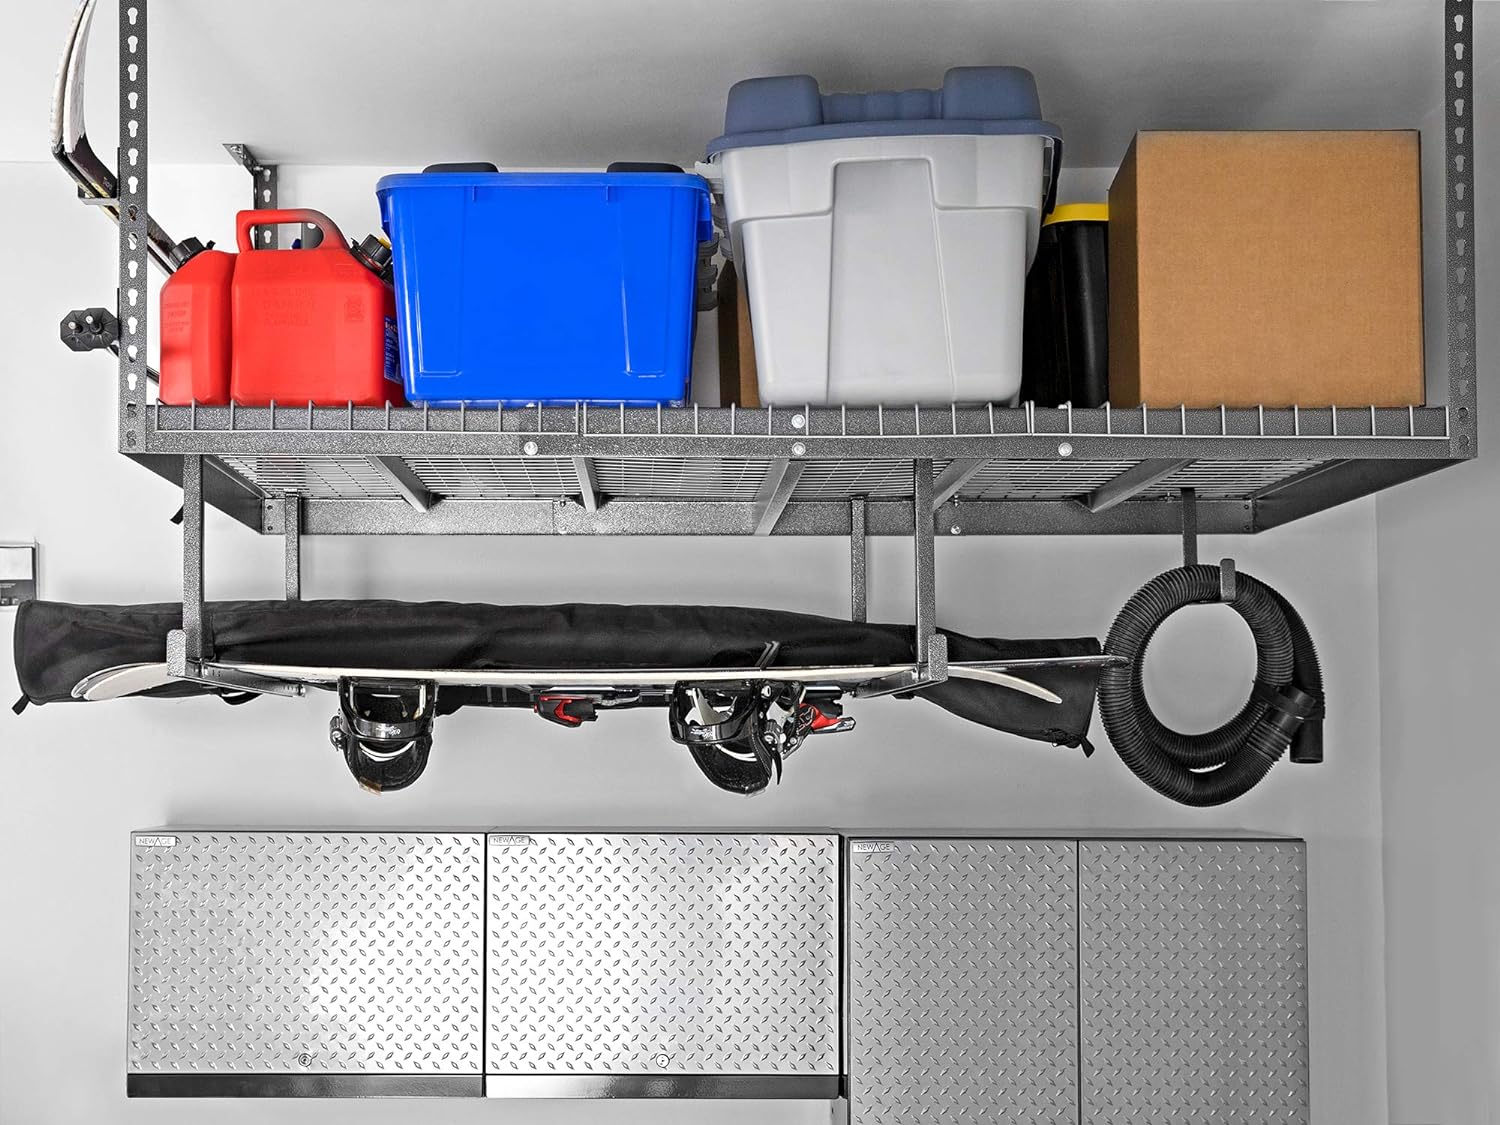 NEW NewAge Products 40152 Ceiling Mount Garage Storage Rack, 4 by 8', White - Retails $328+